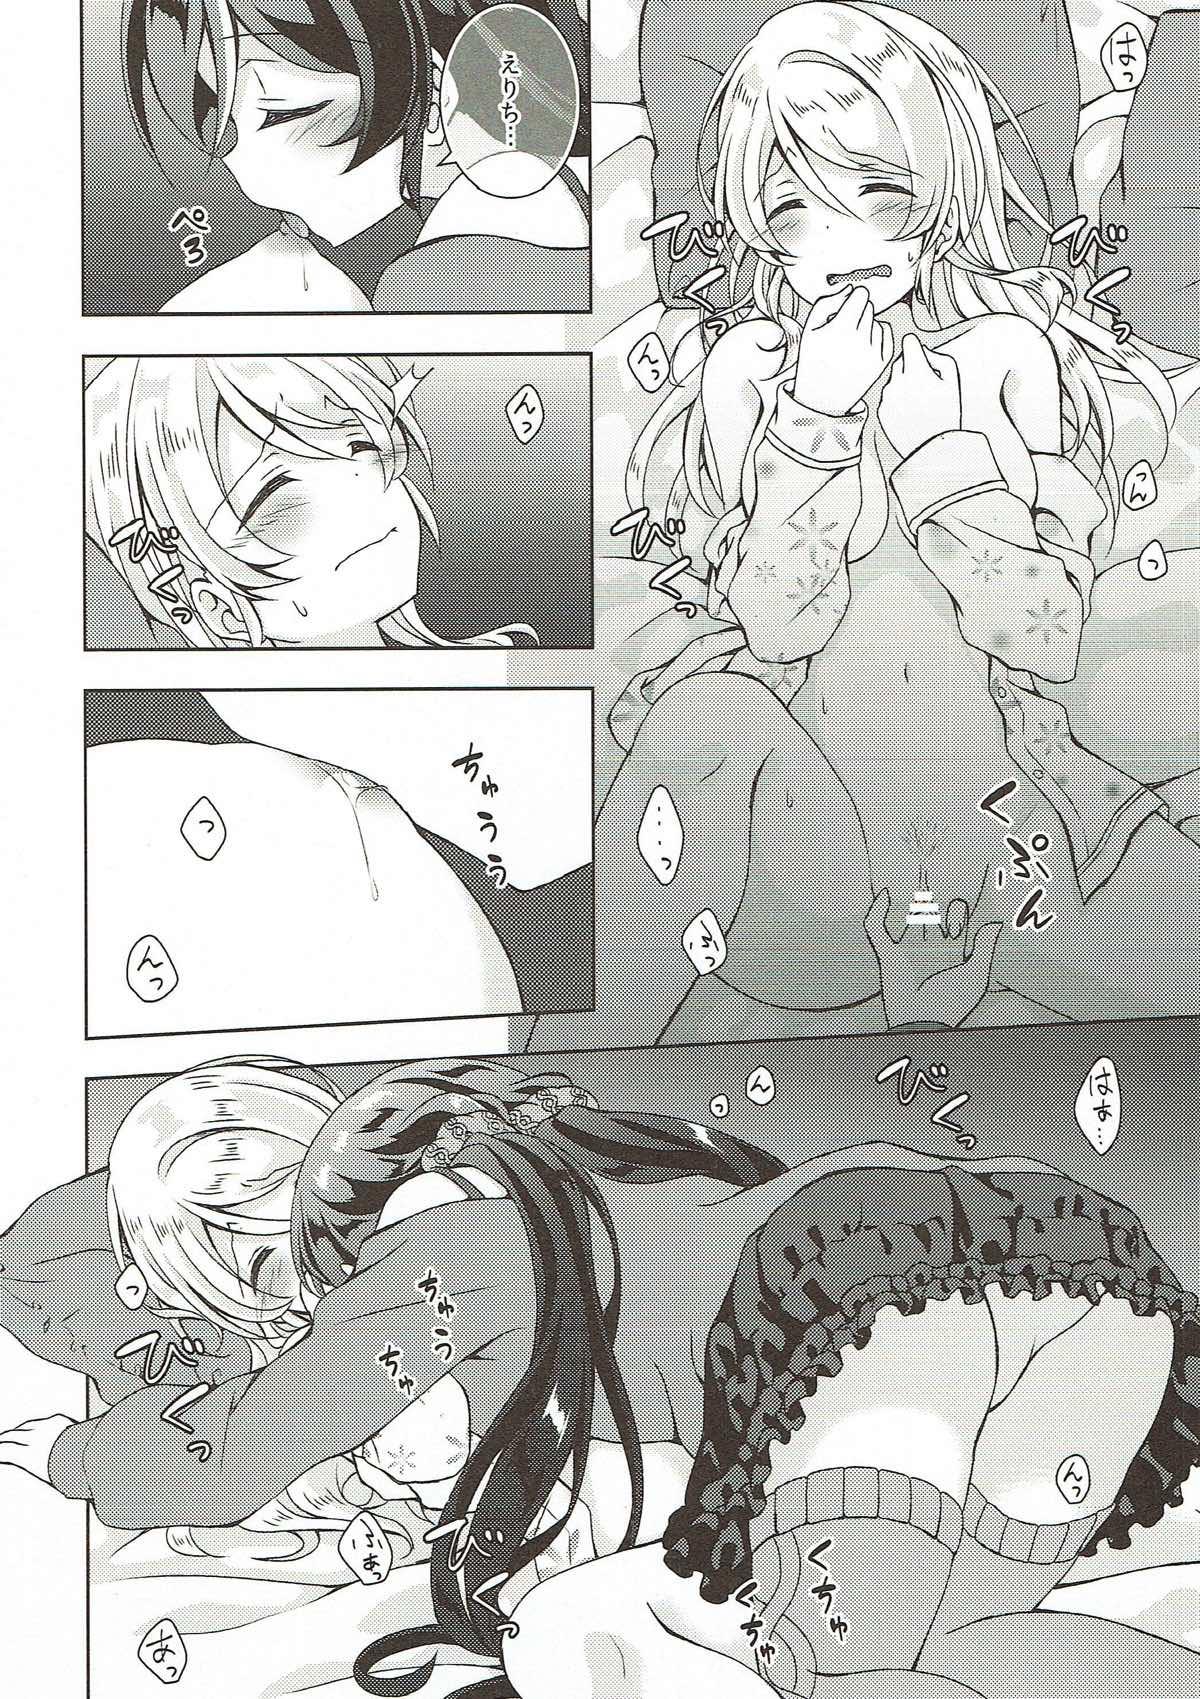 Bathroom Sex to Uso to Yurikago to - Love live Wild - Page 11